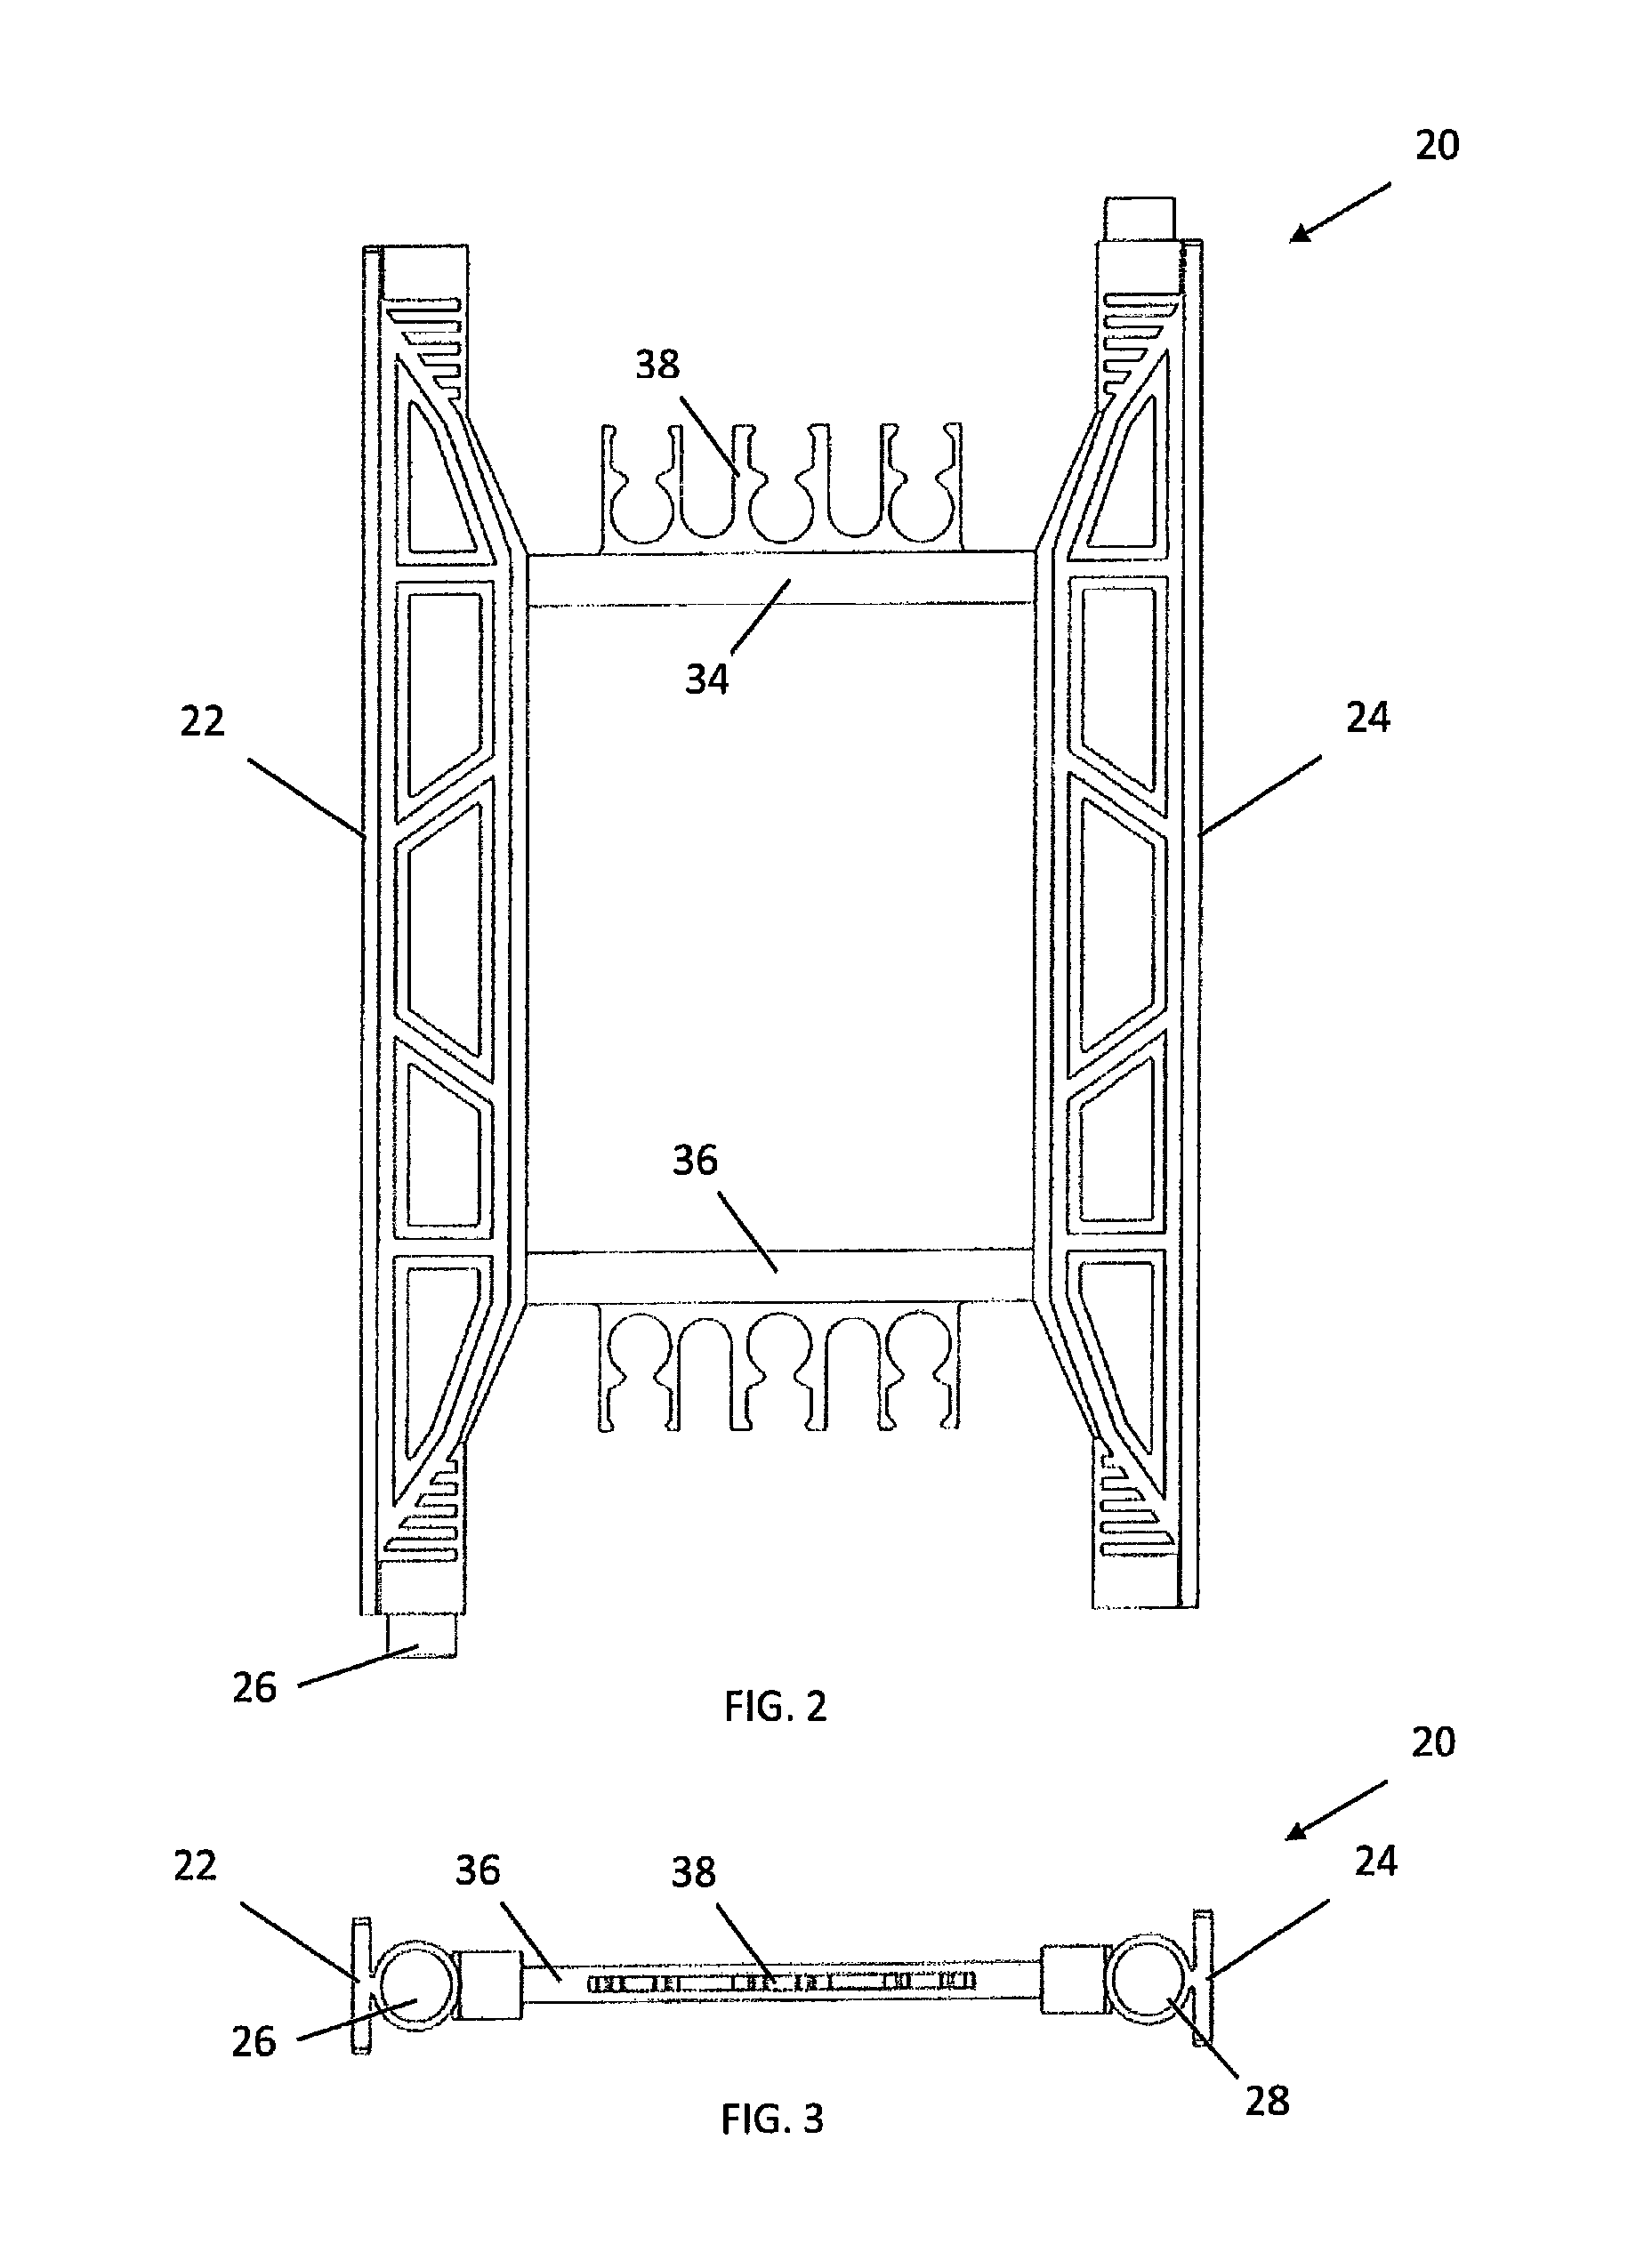 Interlocking web for insulated concrete forms